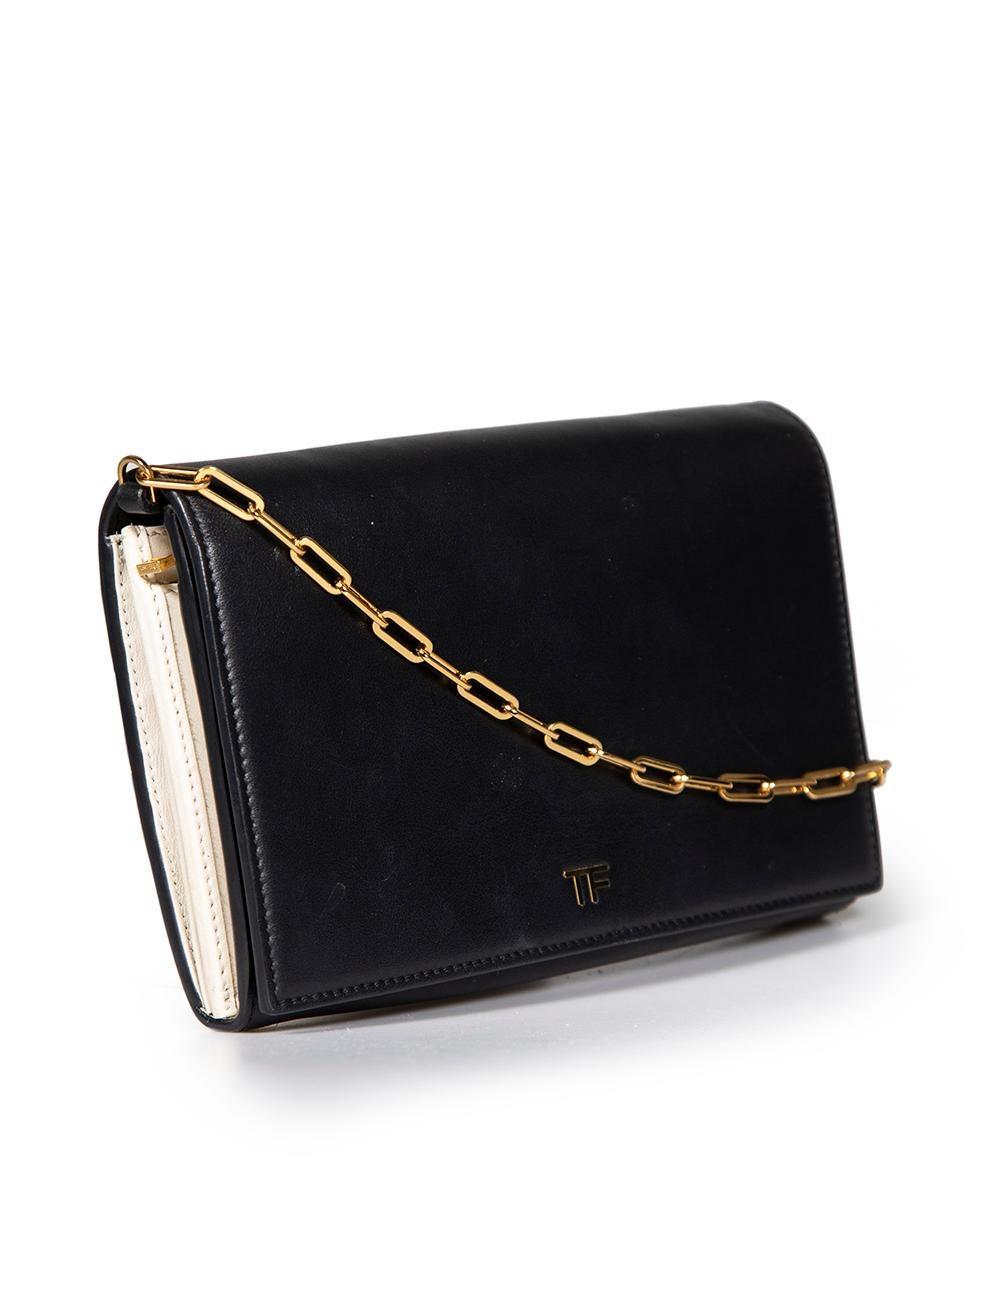 CONDITION is Very good. Minimal wear to clutch is evident. Minimal discoloured marks to overall leather. Discoloured zip mark and red stains on interior on this used Tom Ford designer resale item.
 
 
 
 Details
 
 
 Black
 
 Leather
 
 Chained